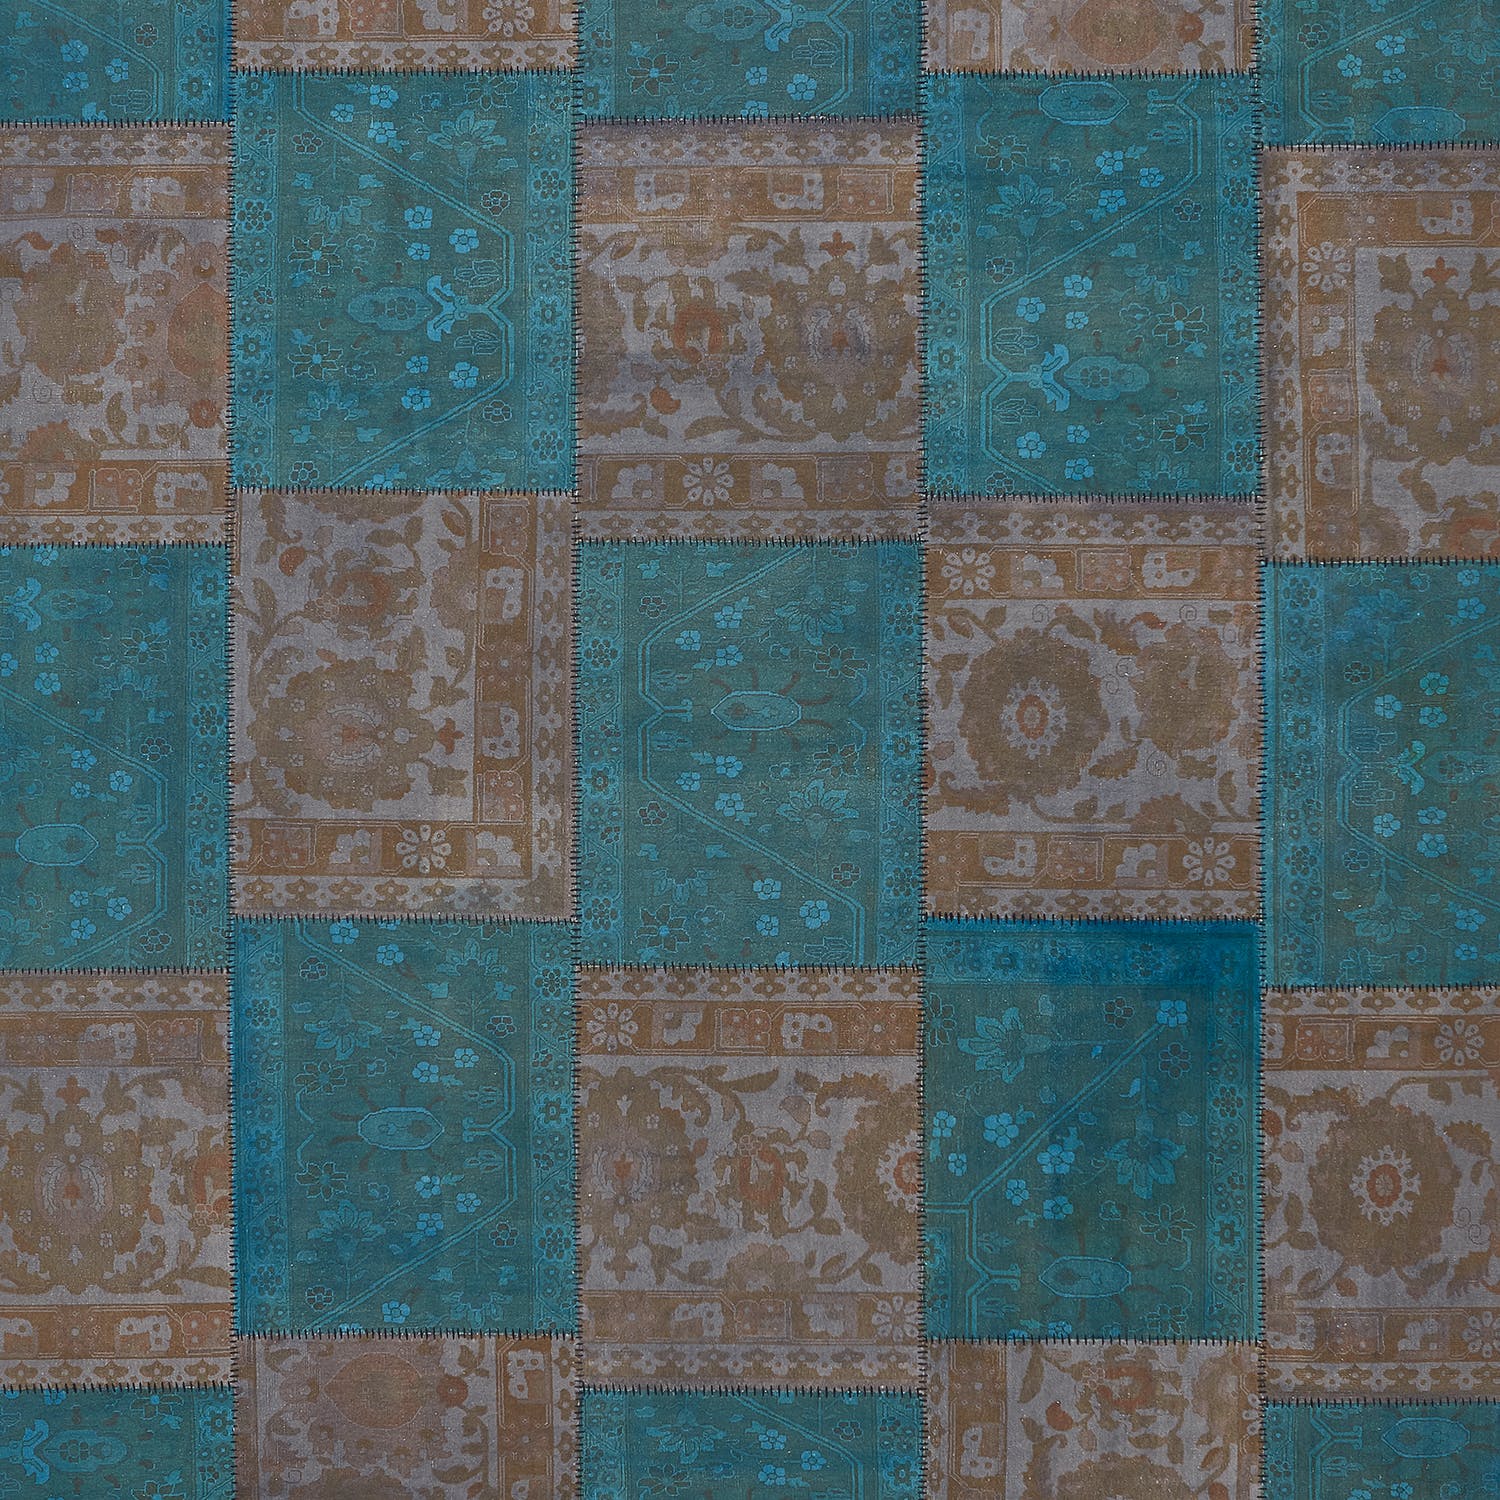 Vintage-inspired patchwork of teal and brown fabric squares with intricate patterns.